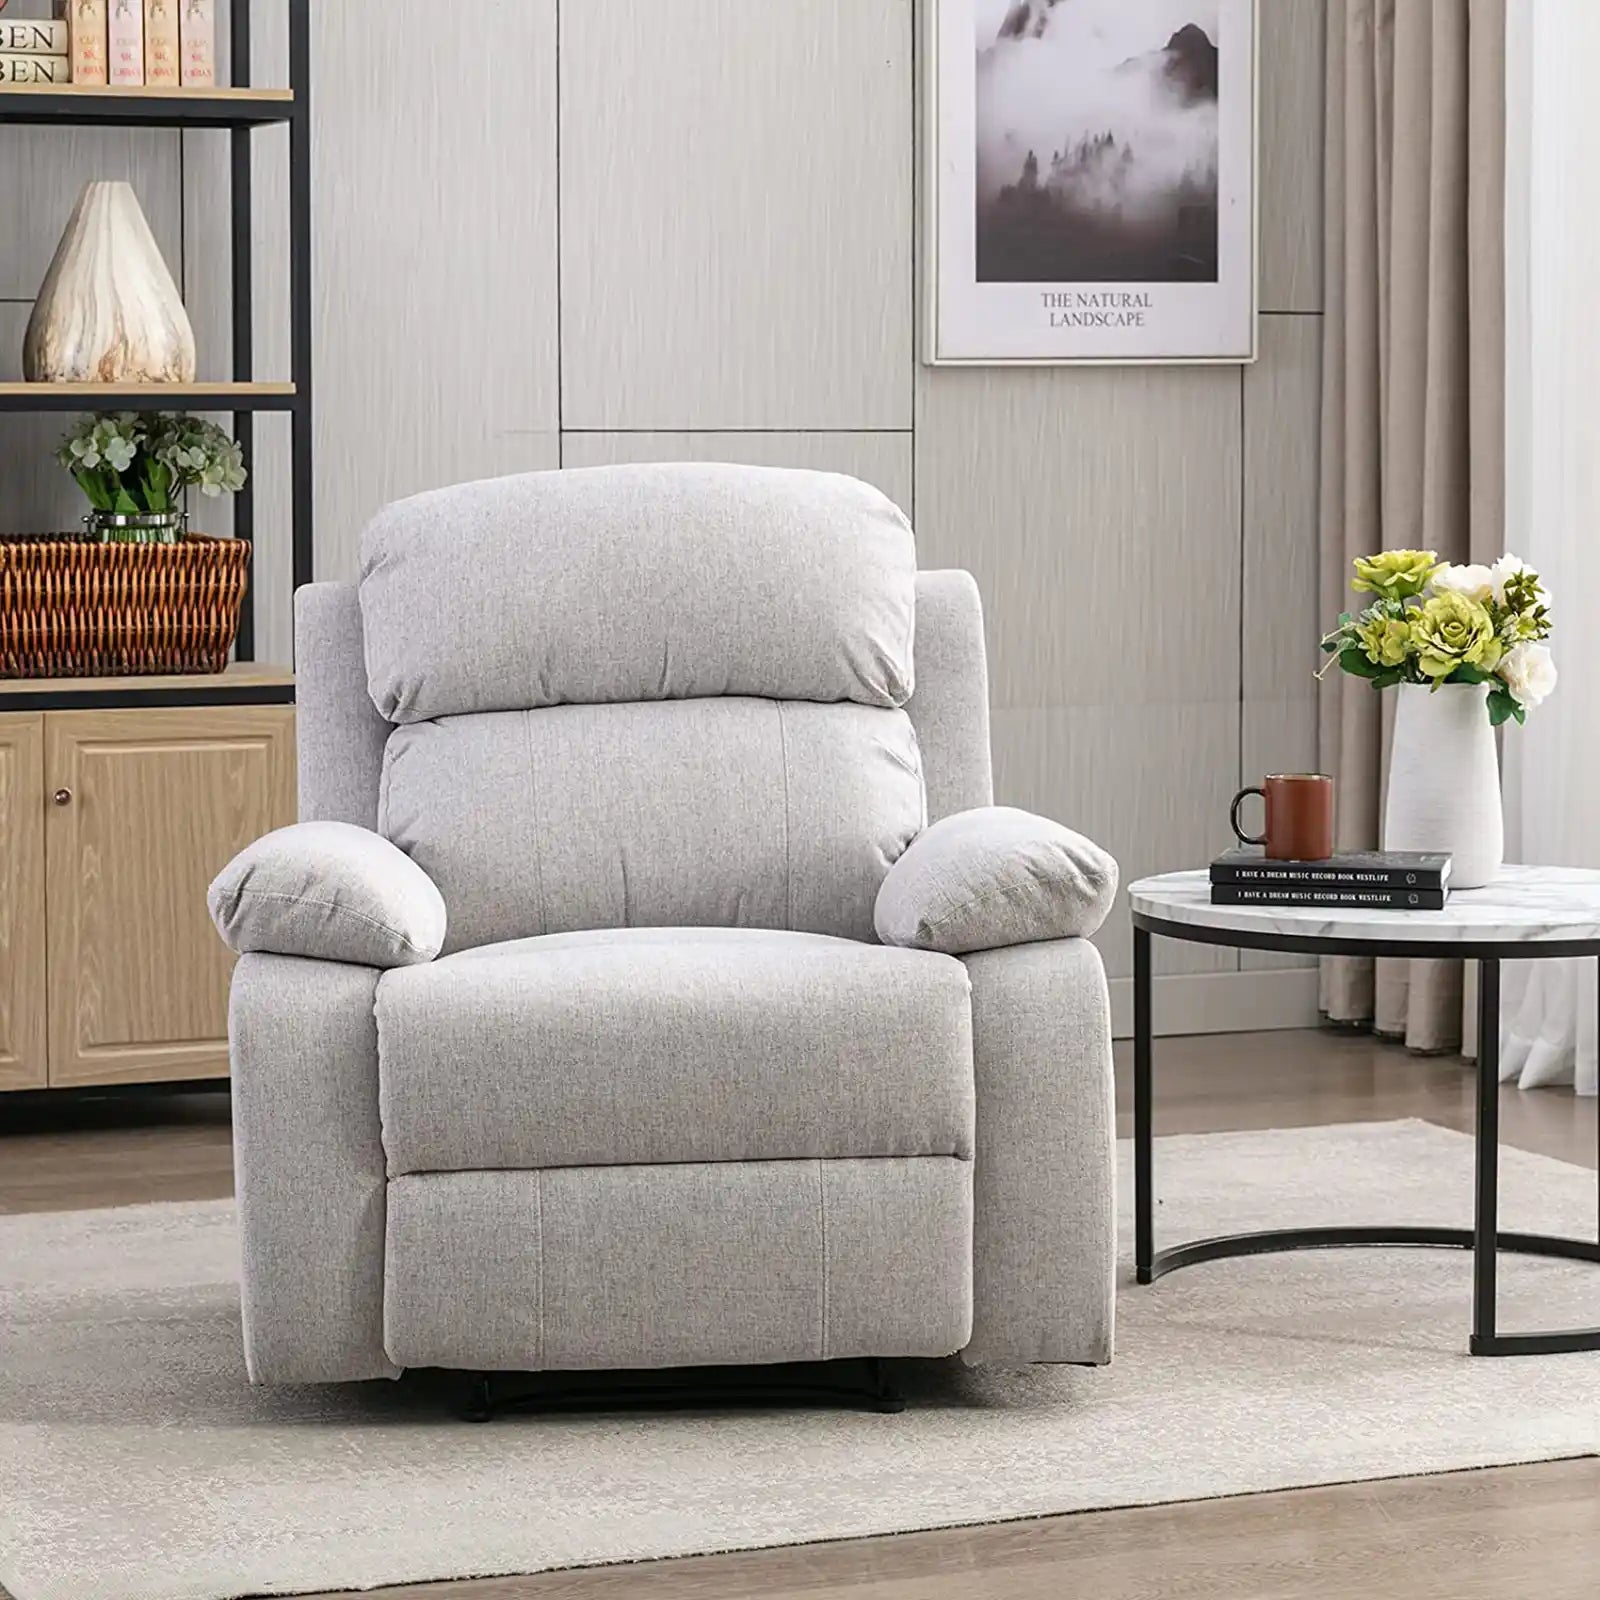 Soft Living Room Recliner Sofa Home Theater Lounge Seat